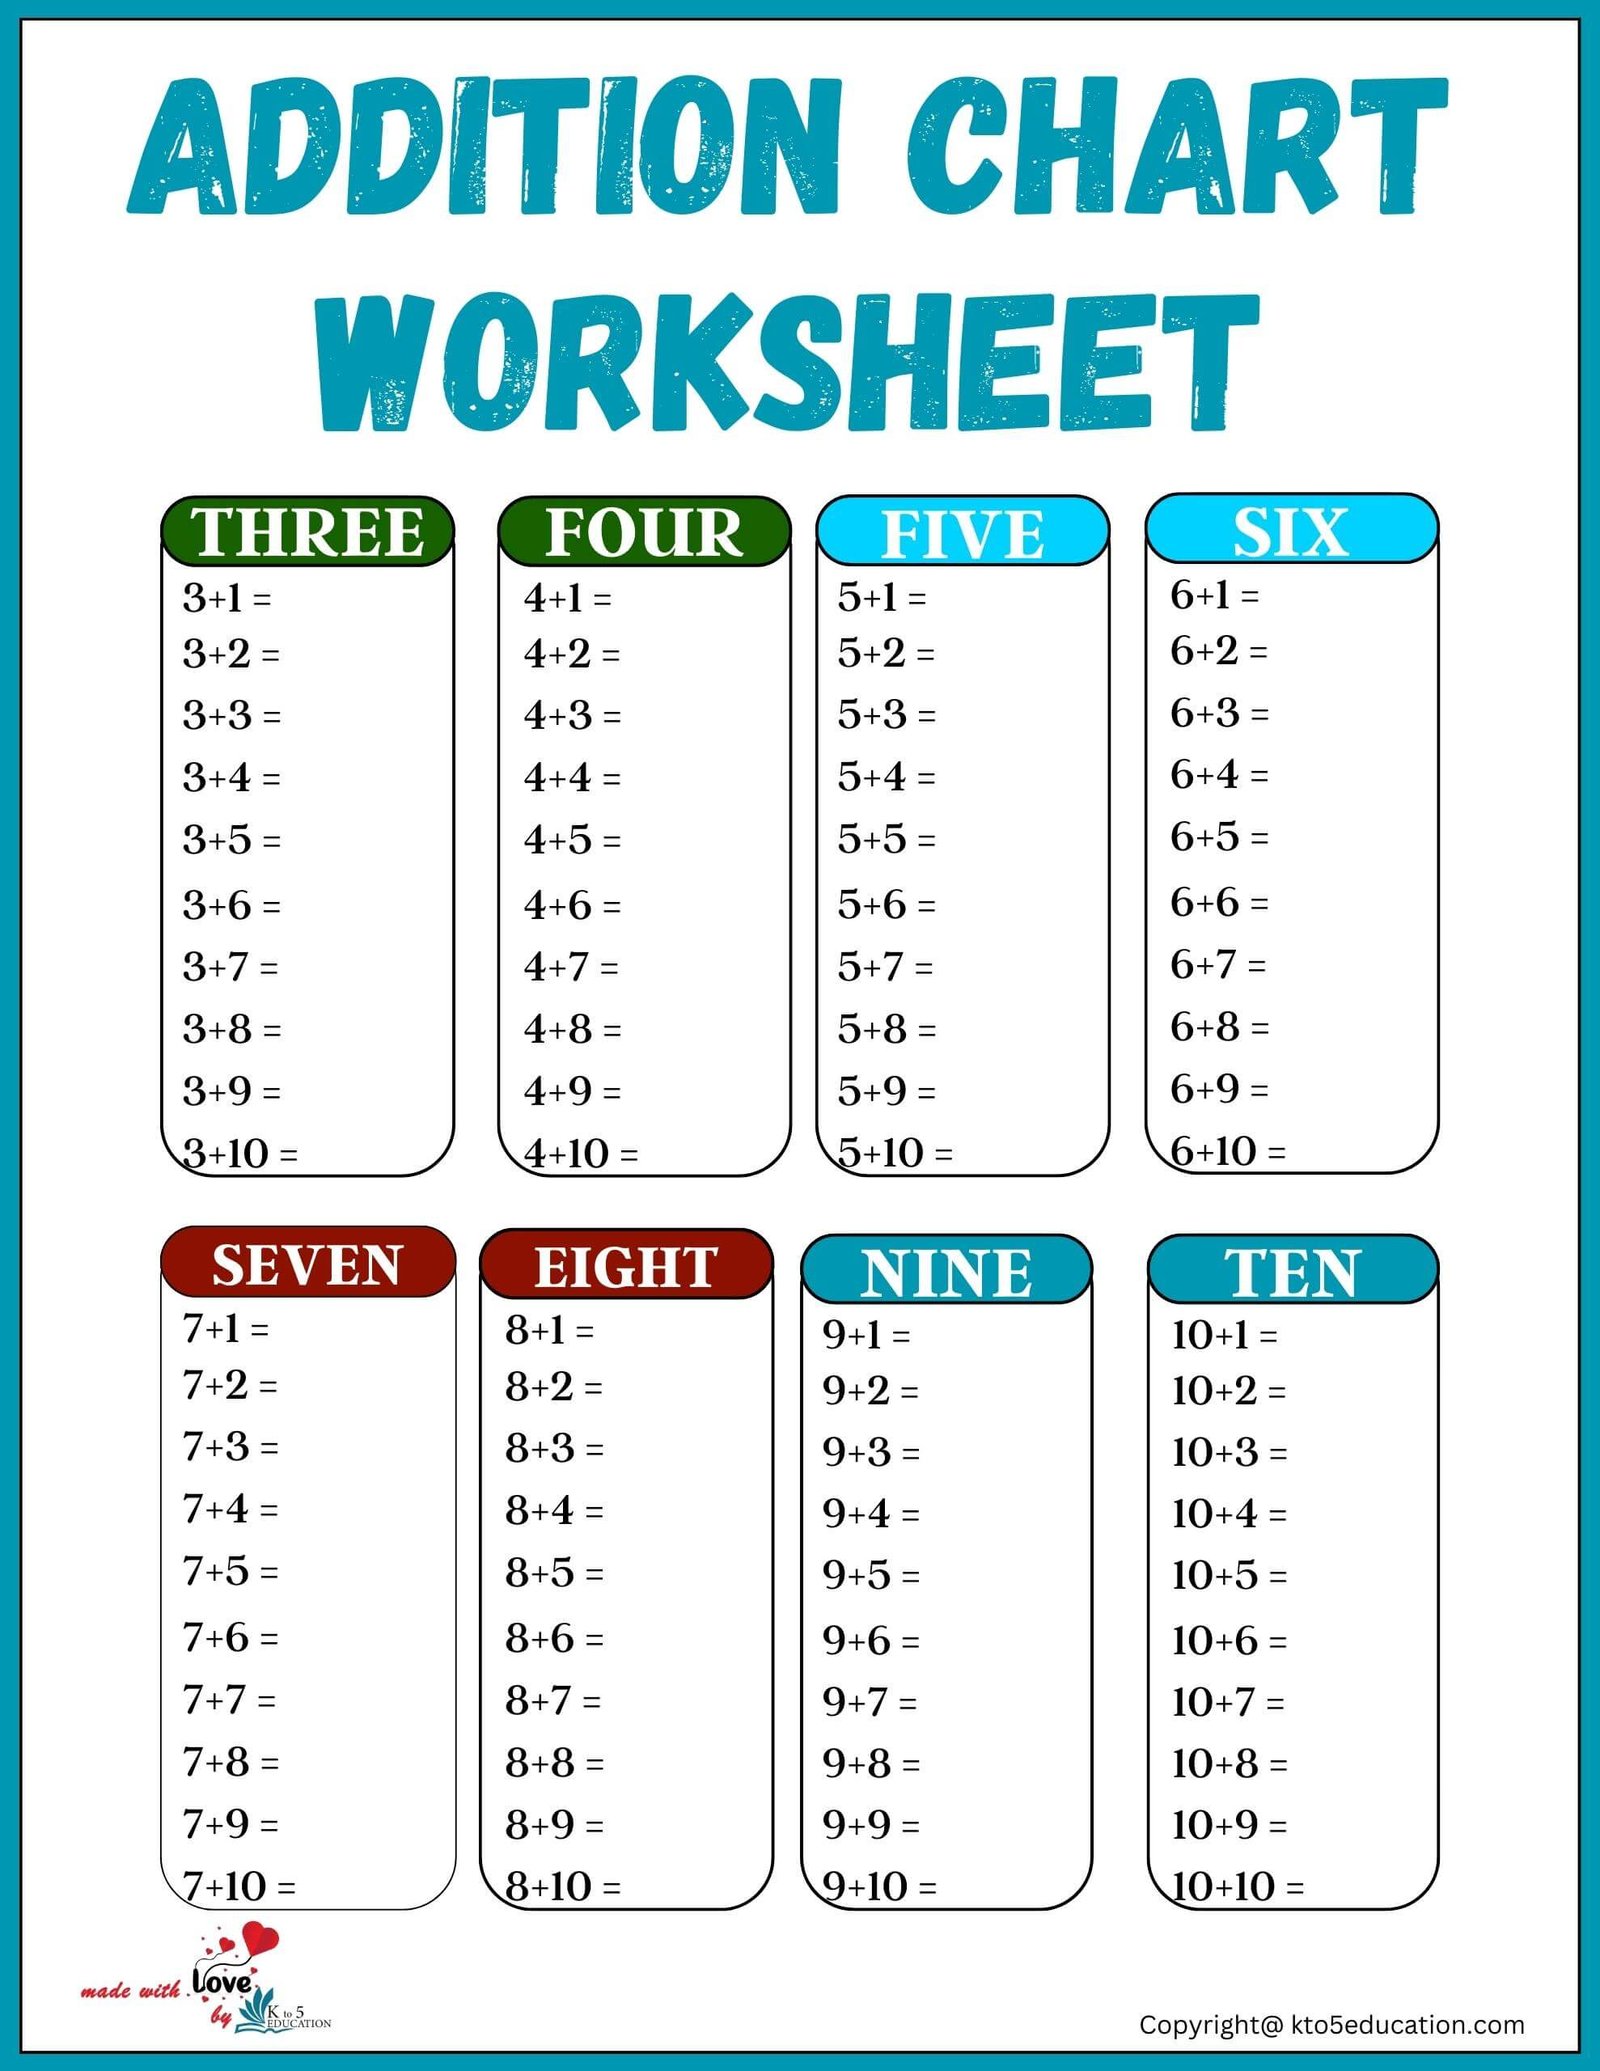 Additions Chart Worksheets